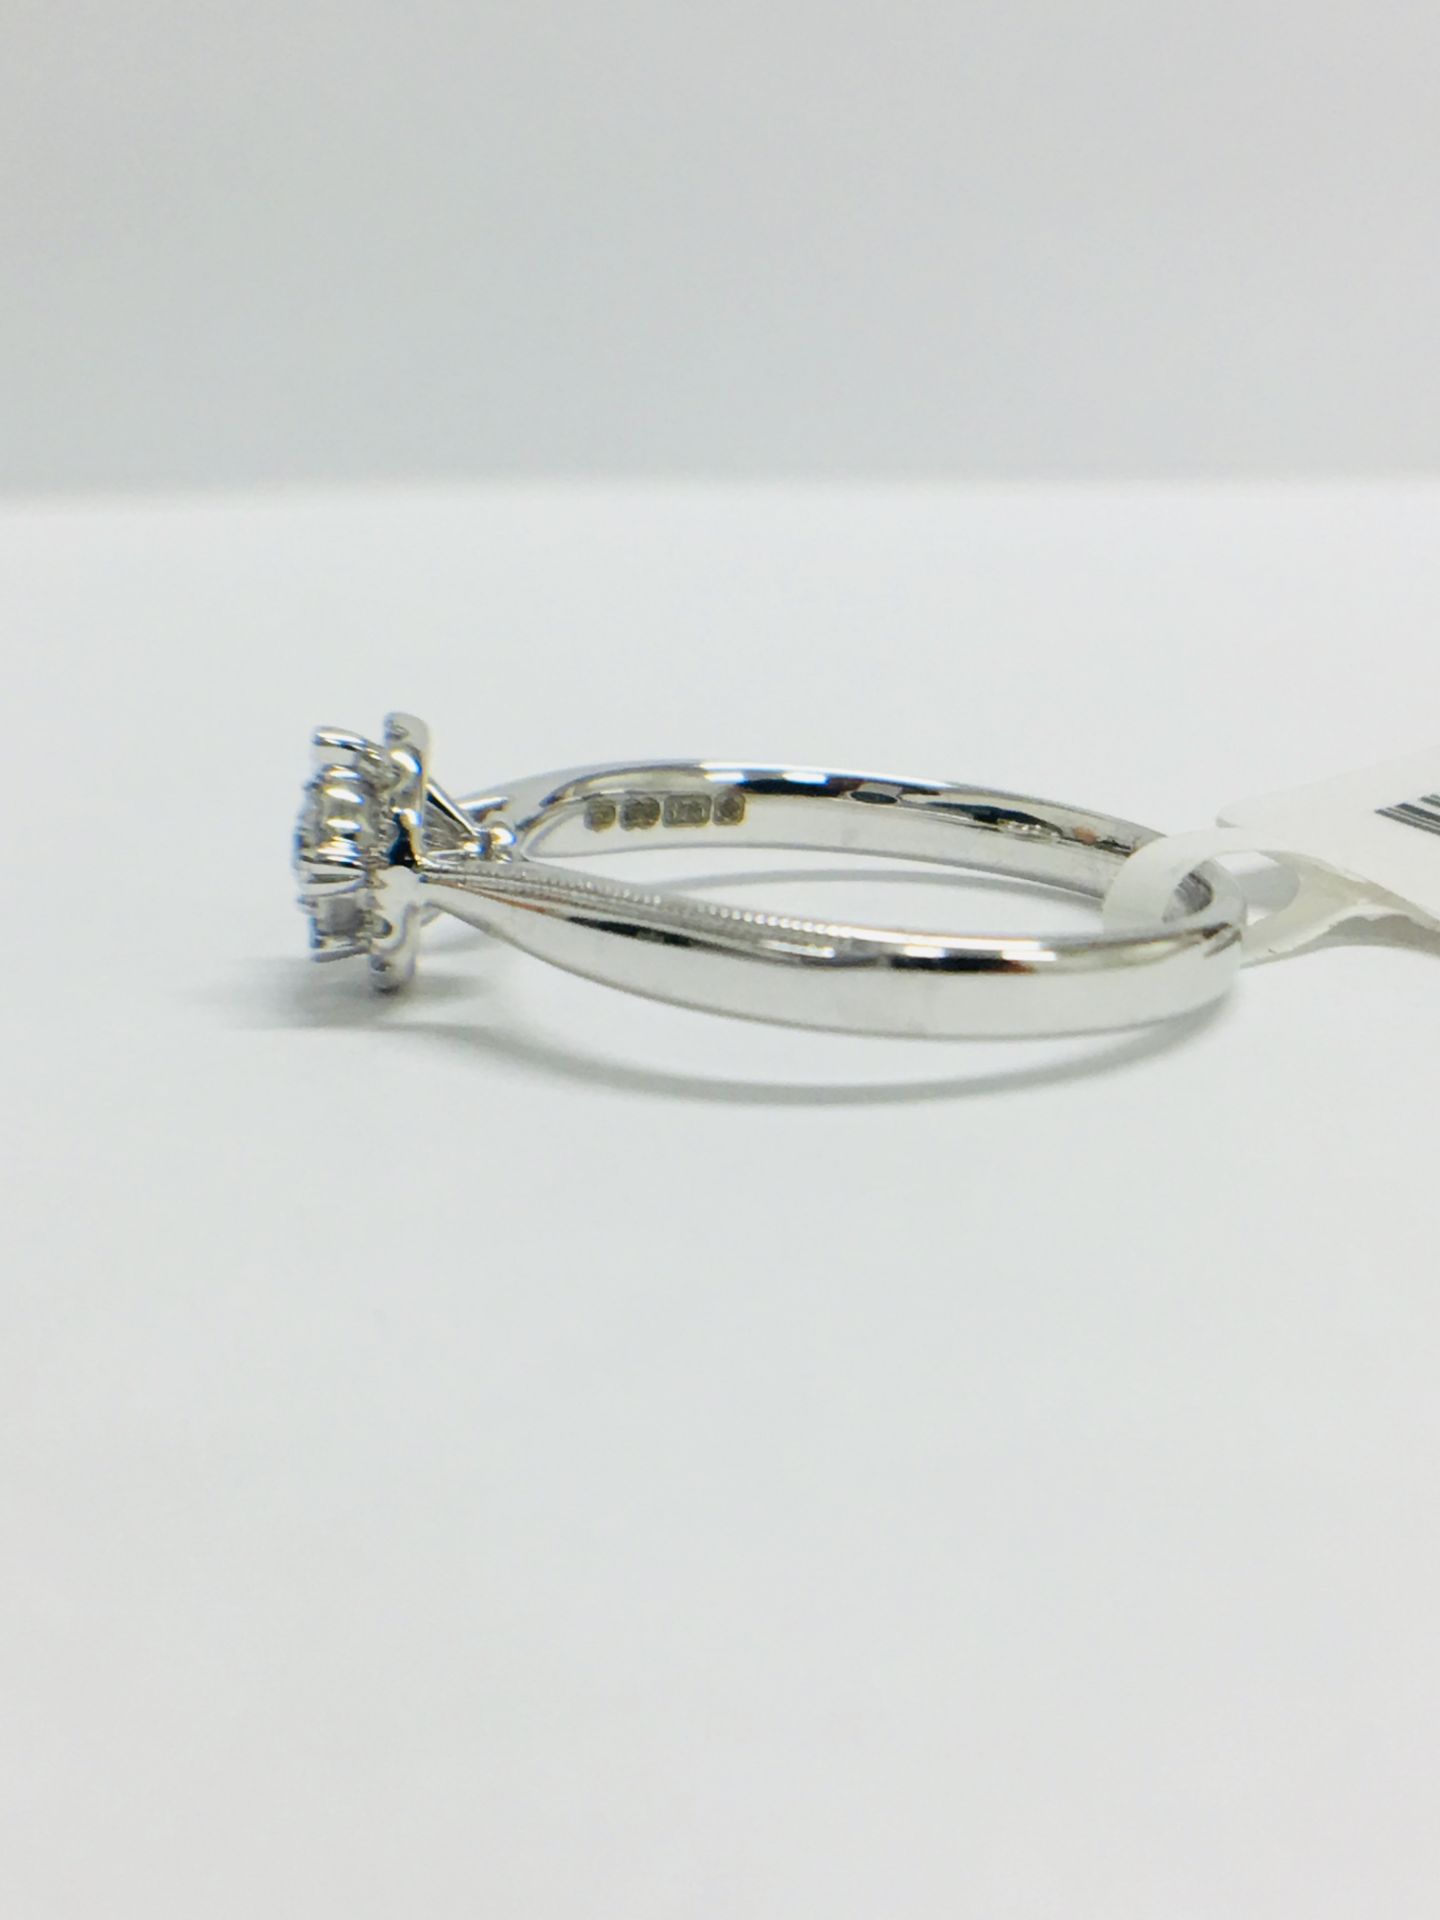 9CT White Gold diamond Solitaire illusion set ring with a millegrain edge shank - Image 4 of 11